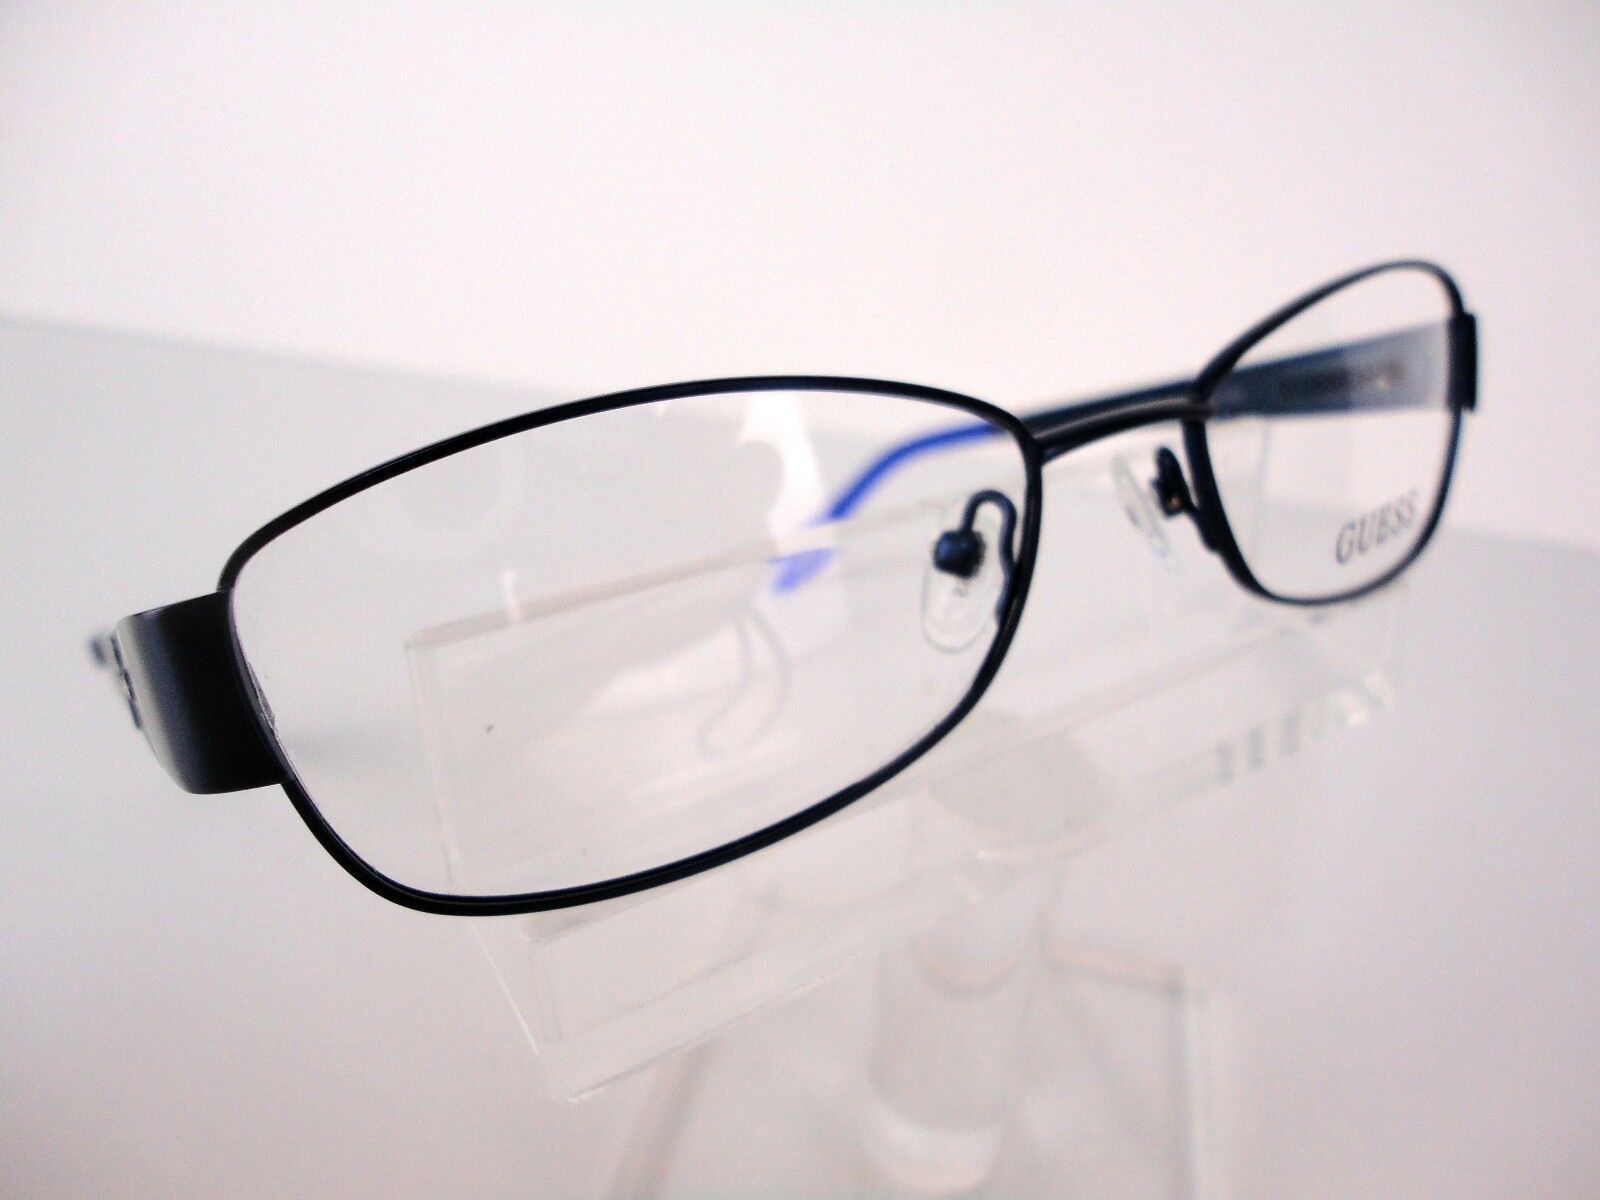 Primary image for GUESS GU 2404 Blue 51 x 17 135 mm Eyeglass Frames